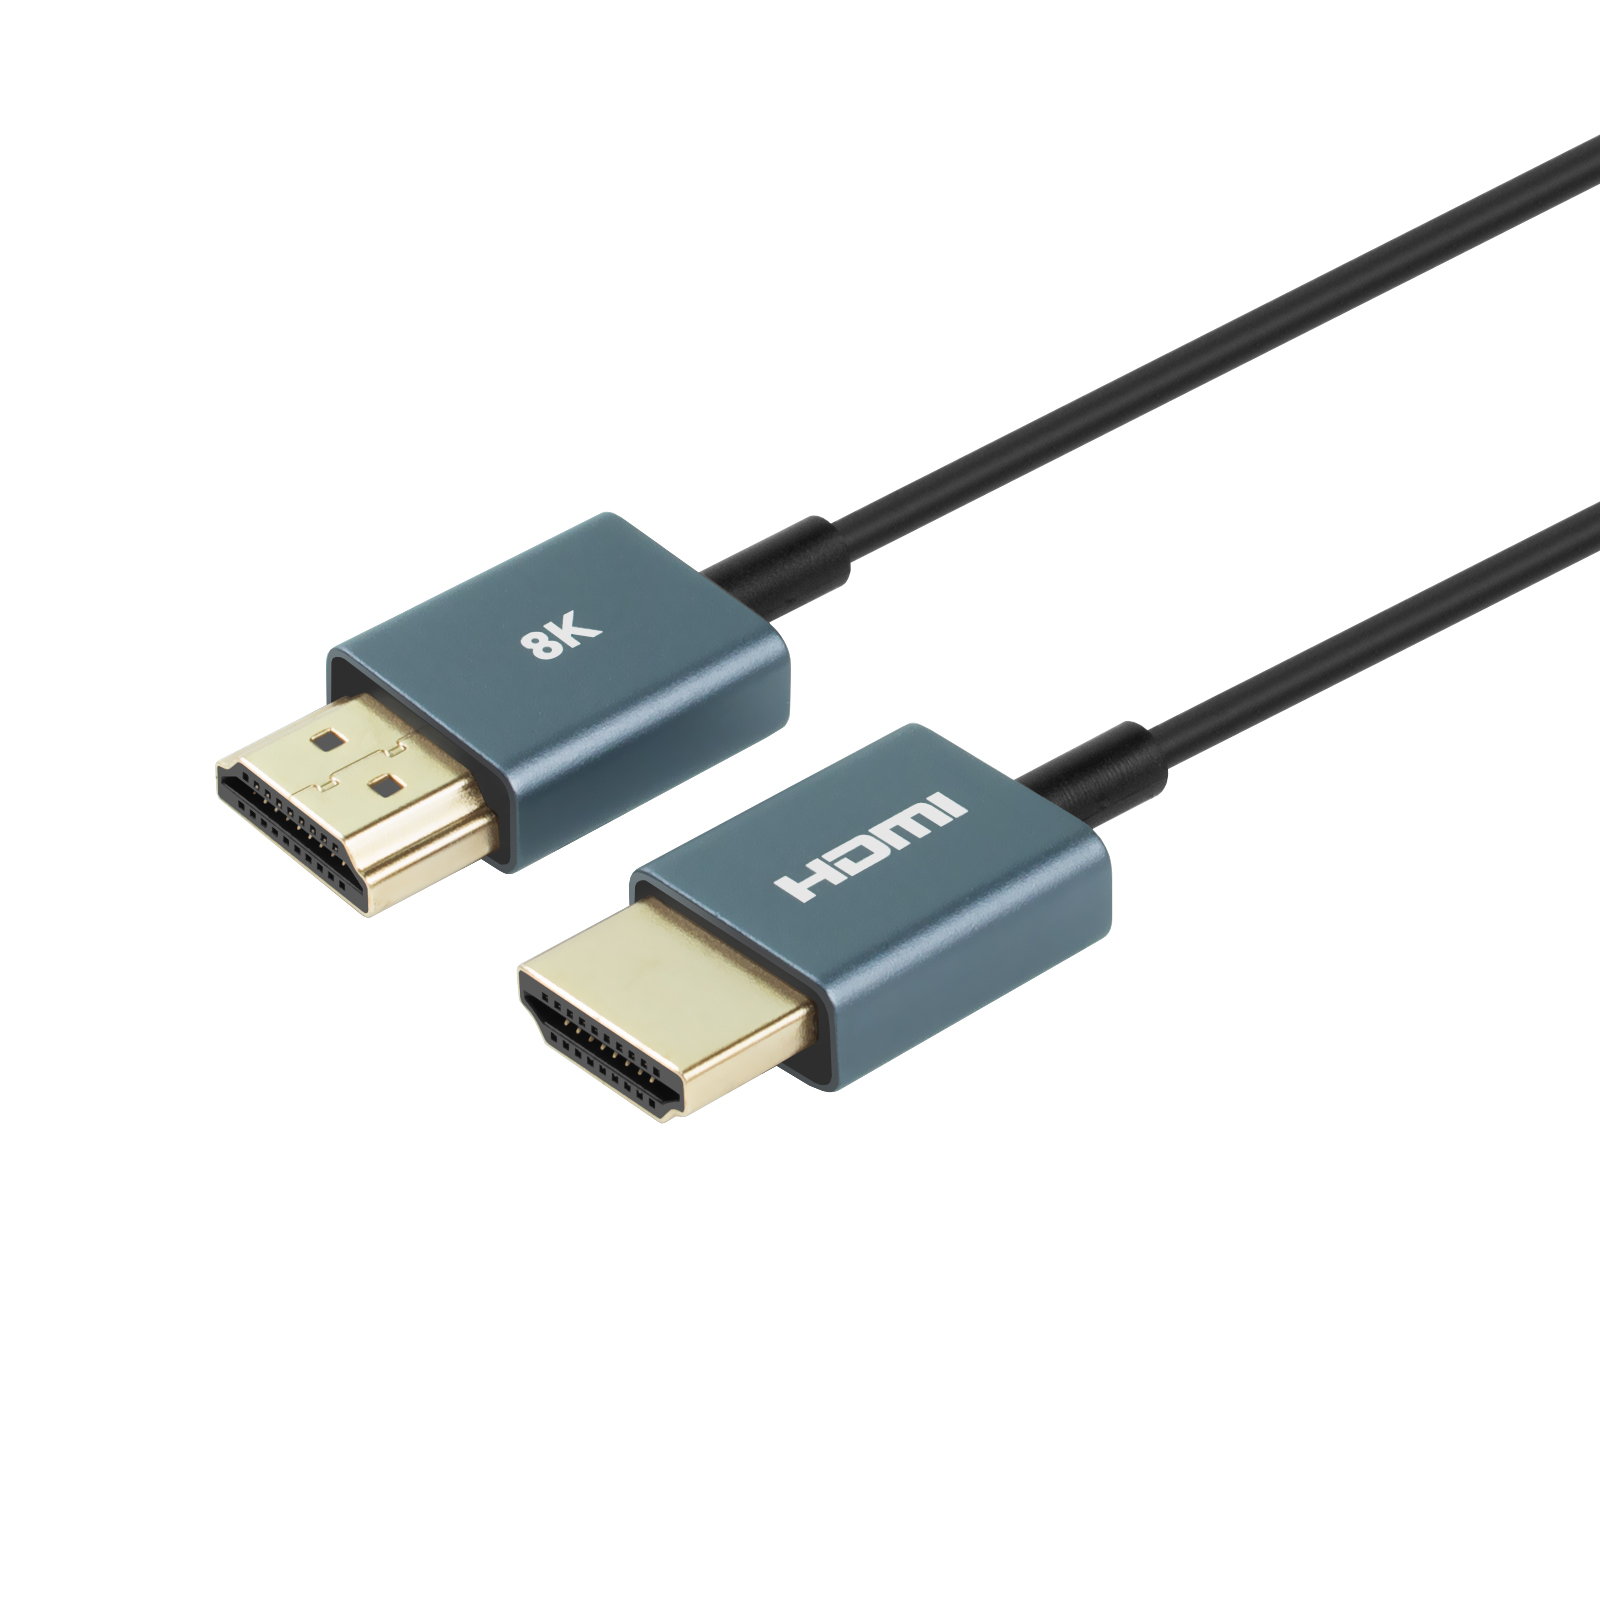 8K coaxial HDMI cable